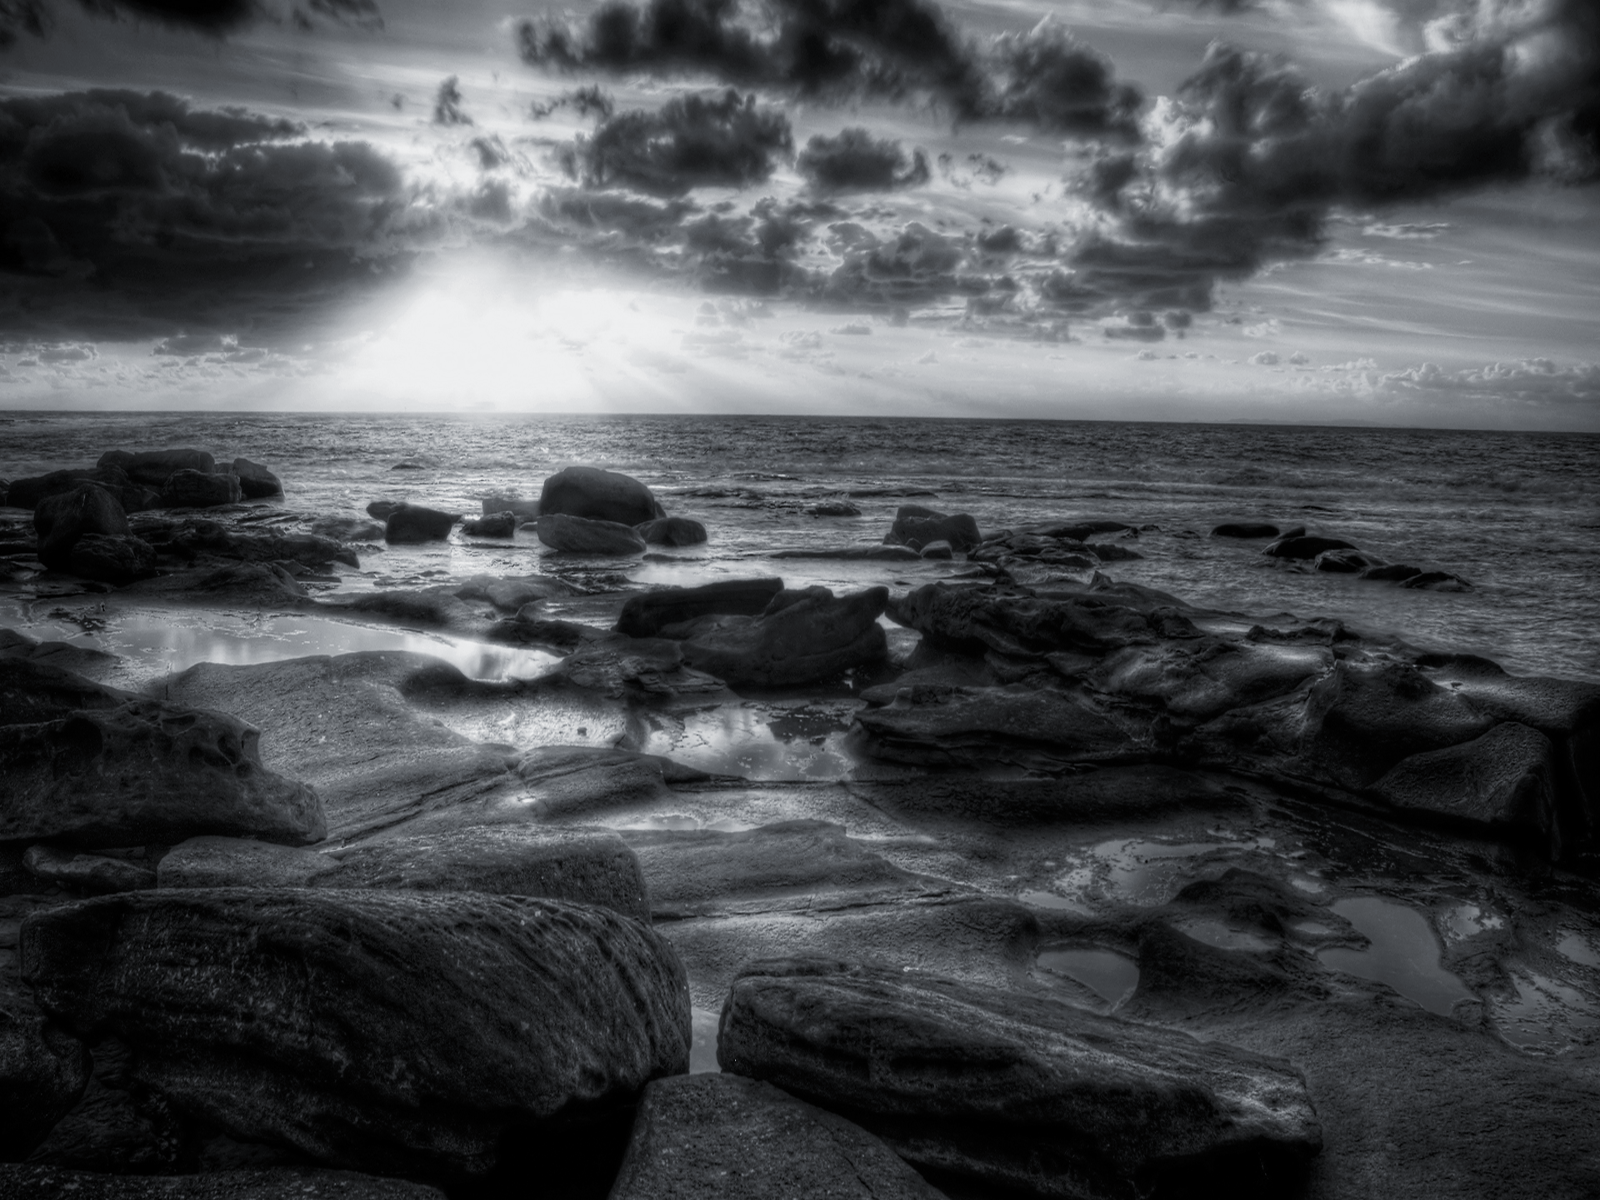 Black and White Sea Rocks Sunset wallpaper “A